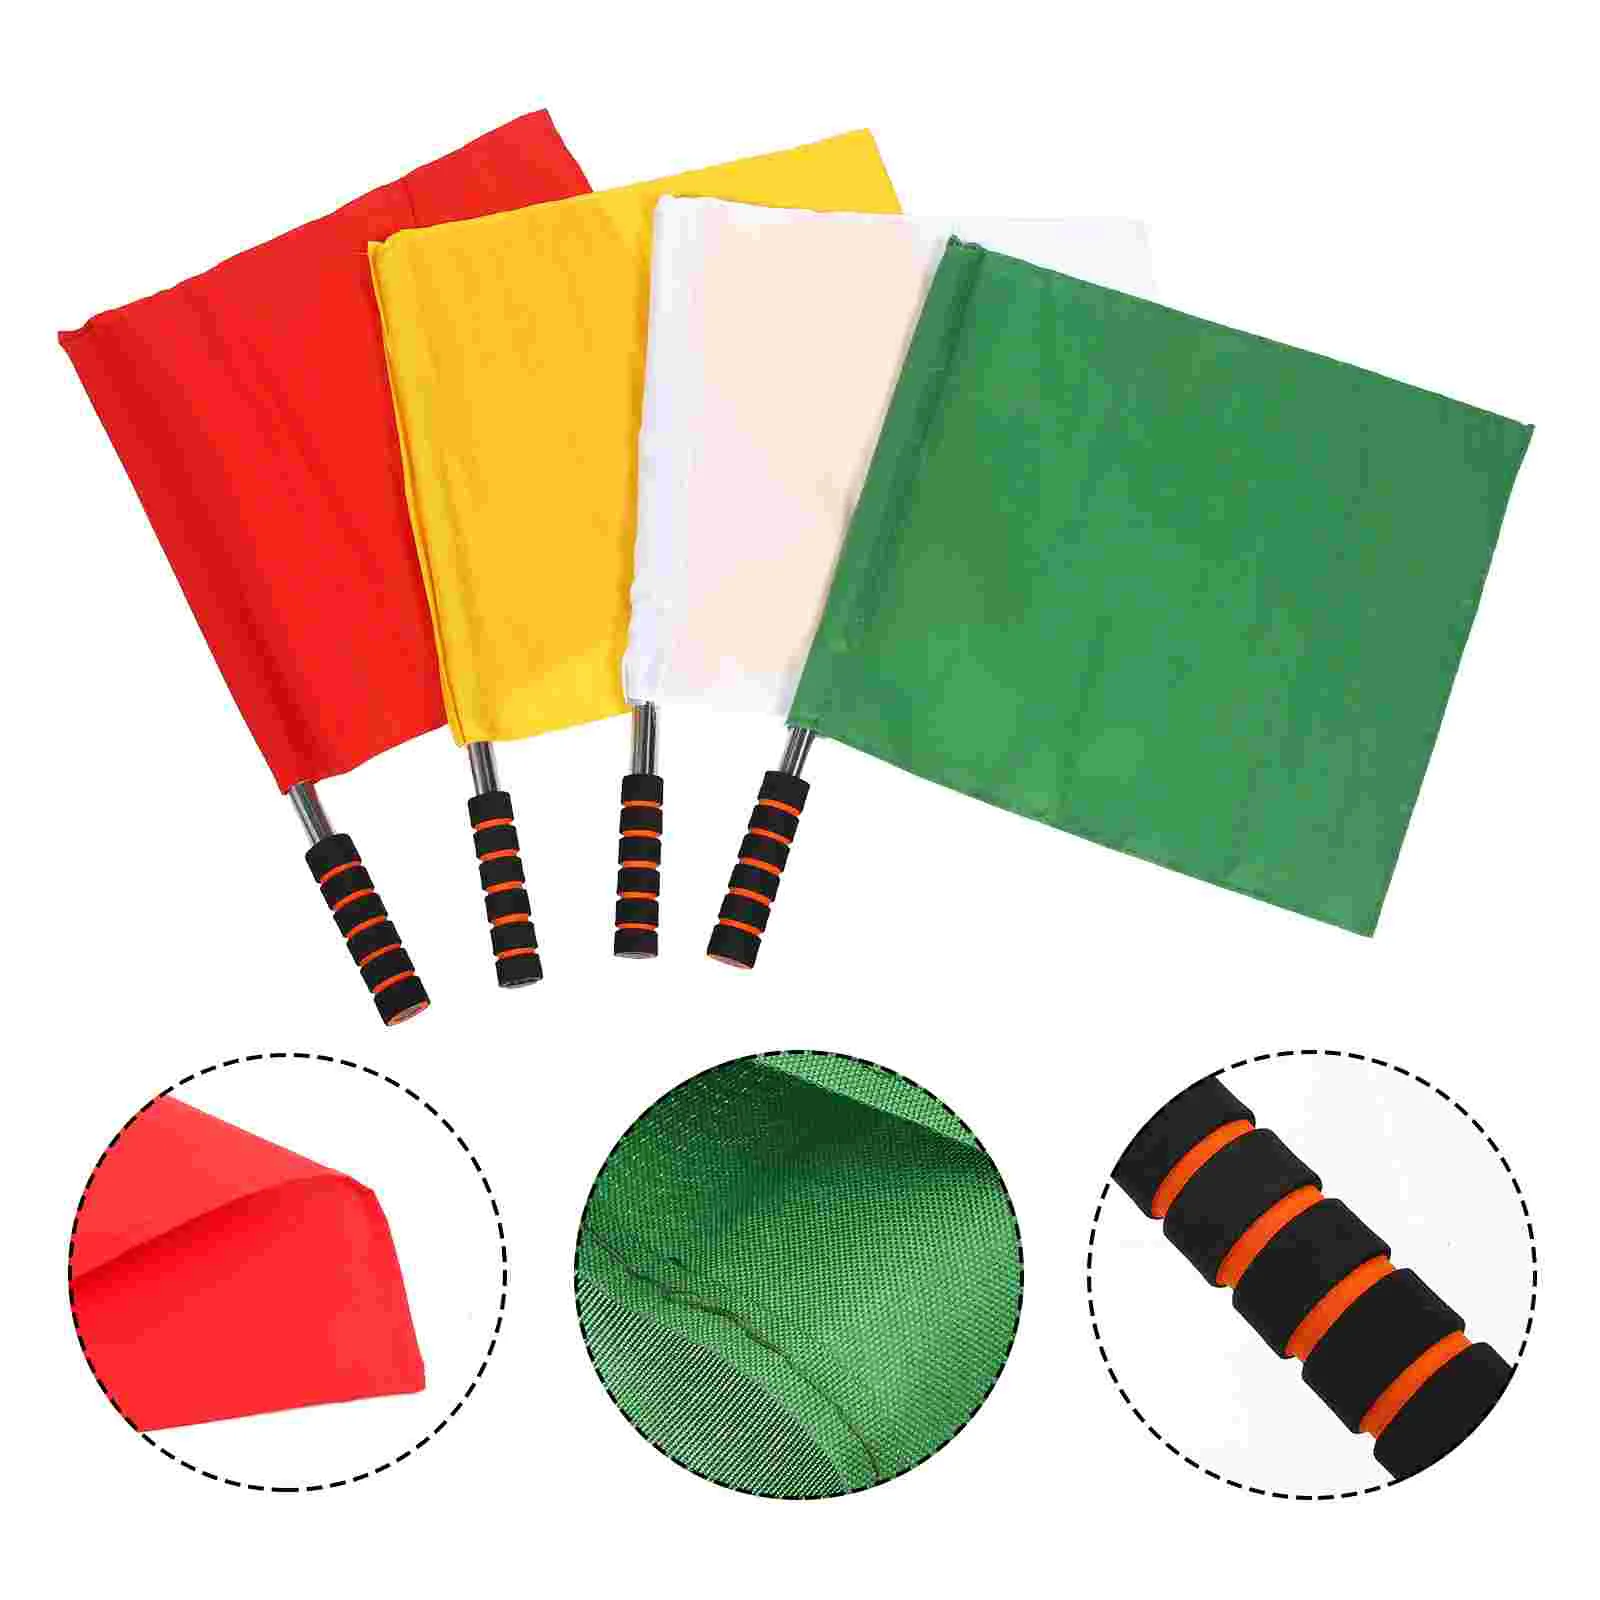 

4 Pcs Red Red Flagsss Referee Small Hand Race Conducting Waving Football Match Signal Colored